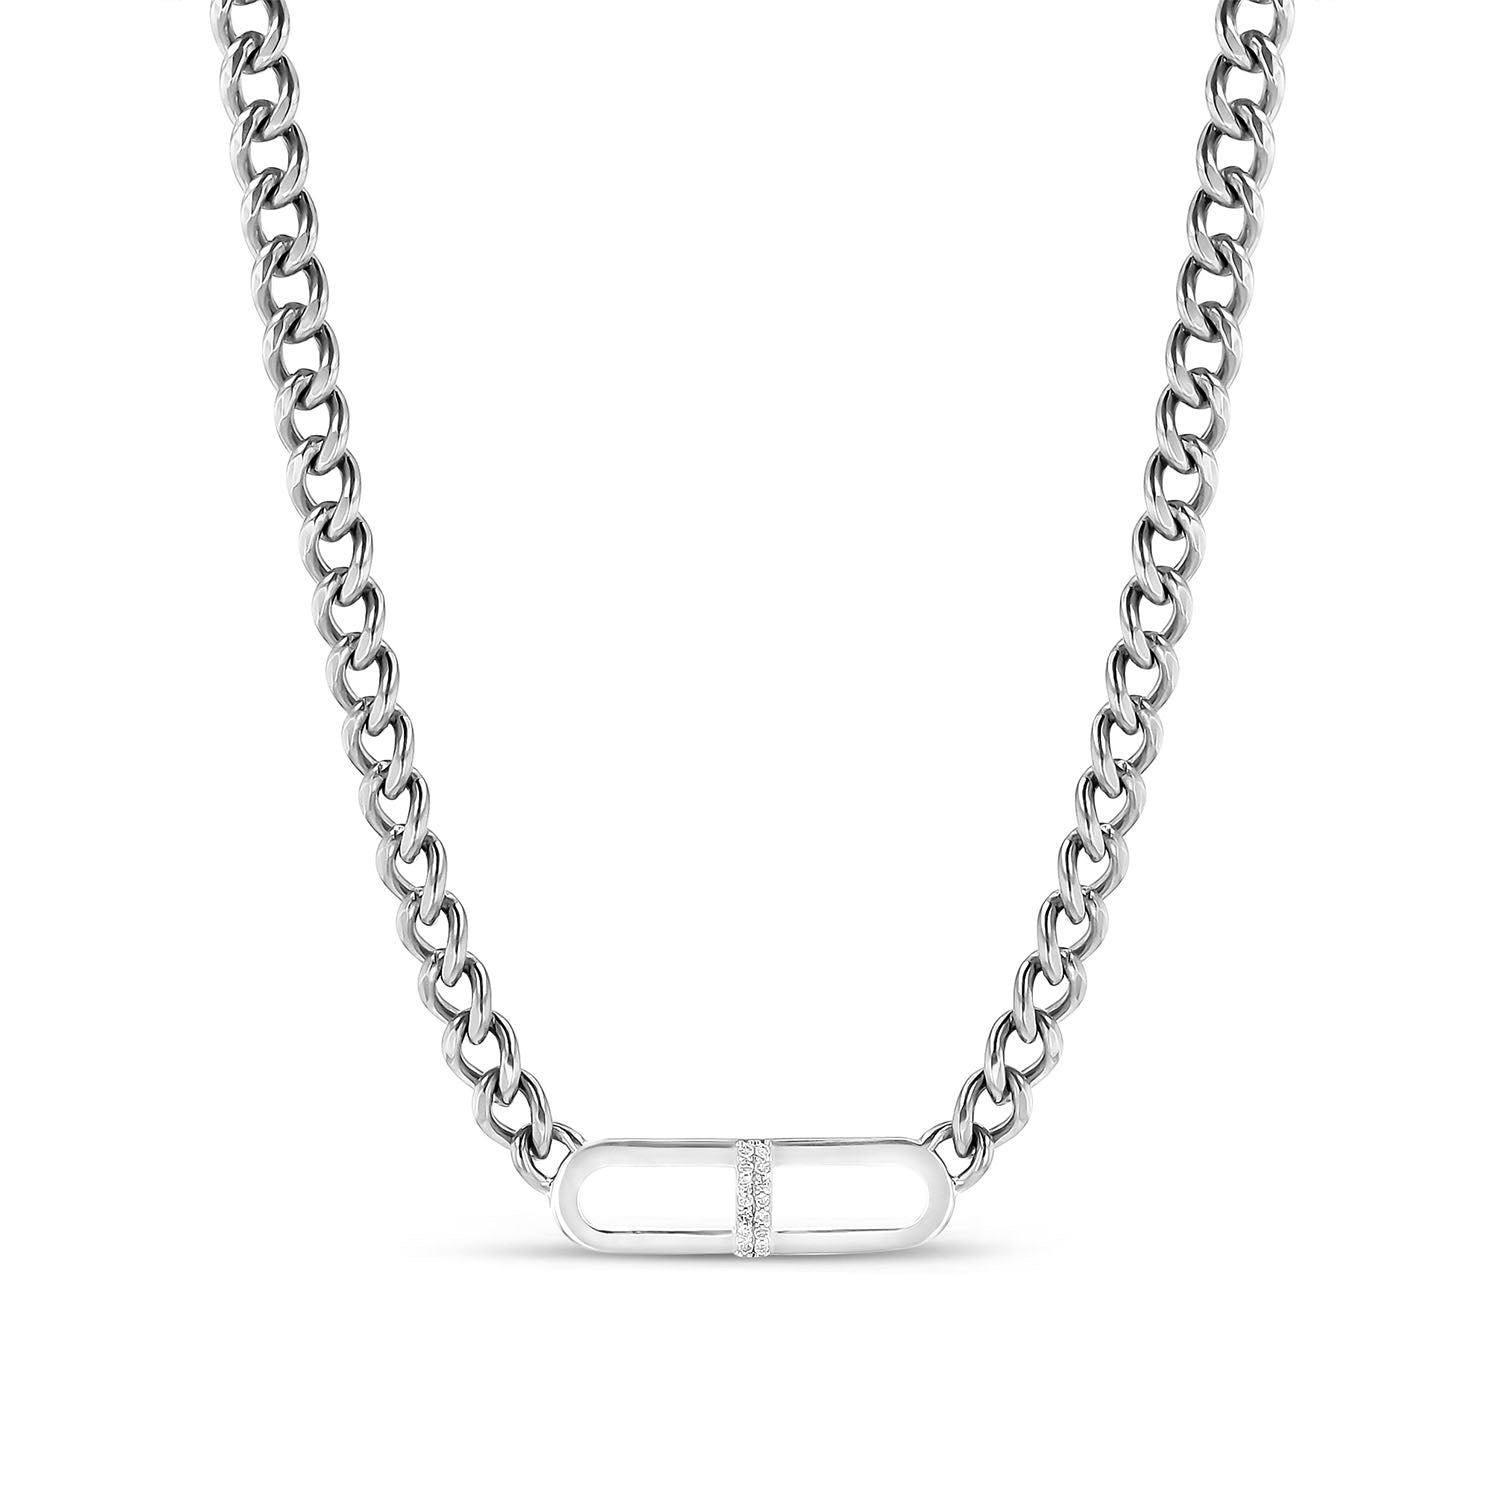 Sterling Silver and Diamond H Link on Curb Chain Necklace - 17"  N02990BG - TBird